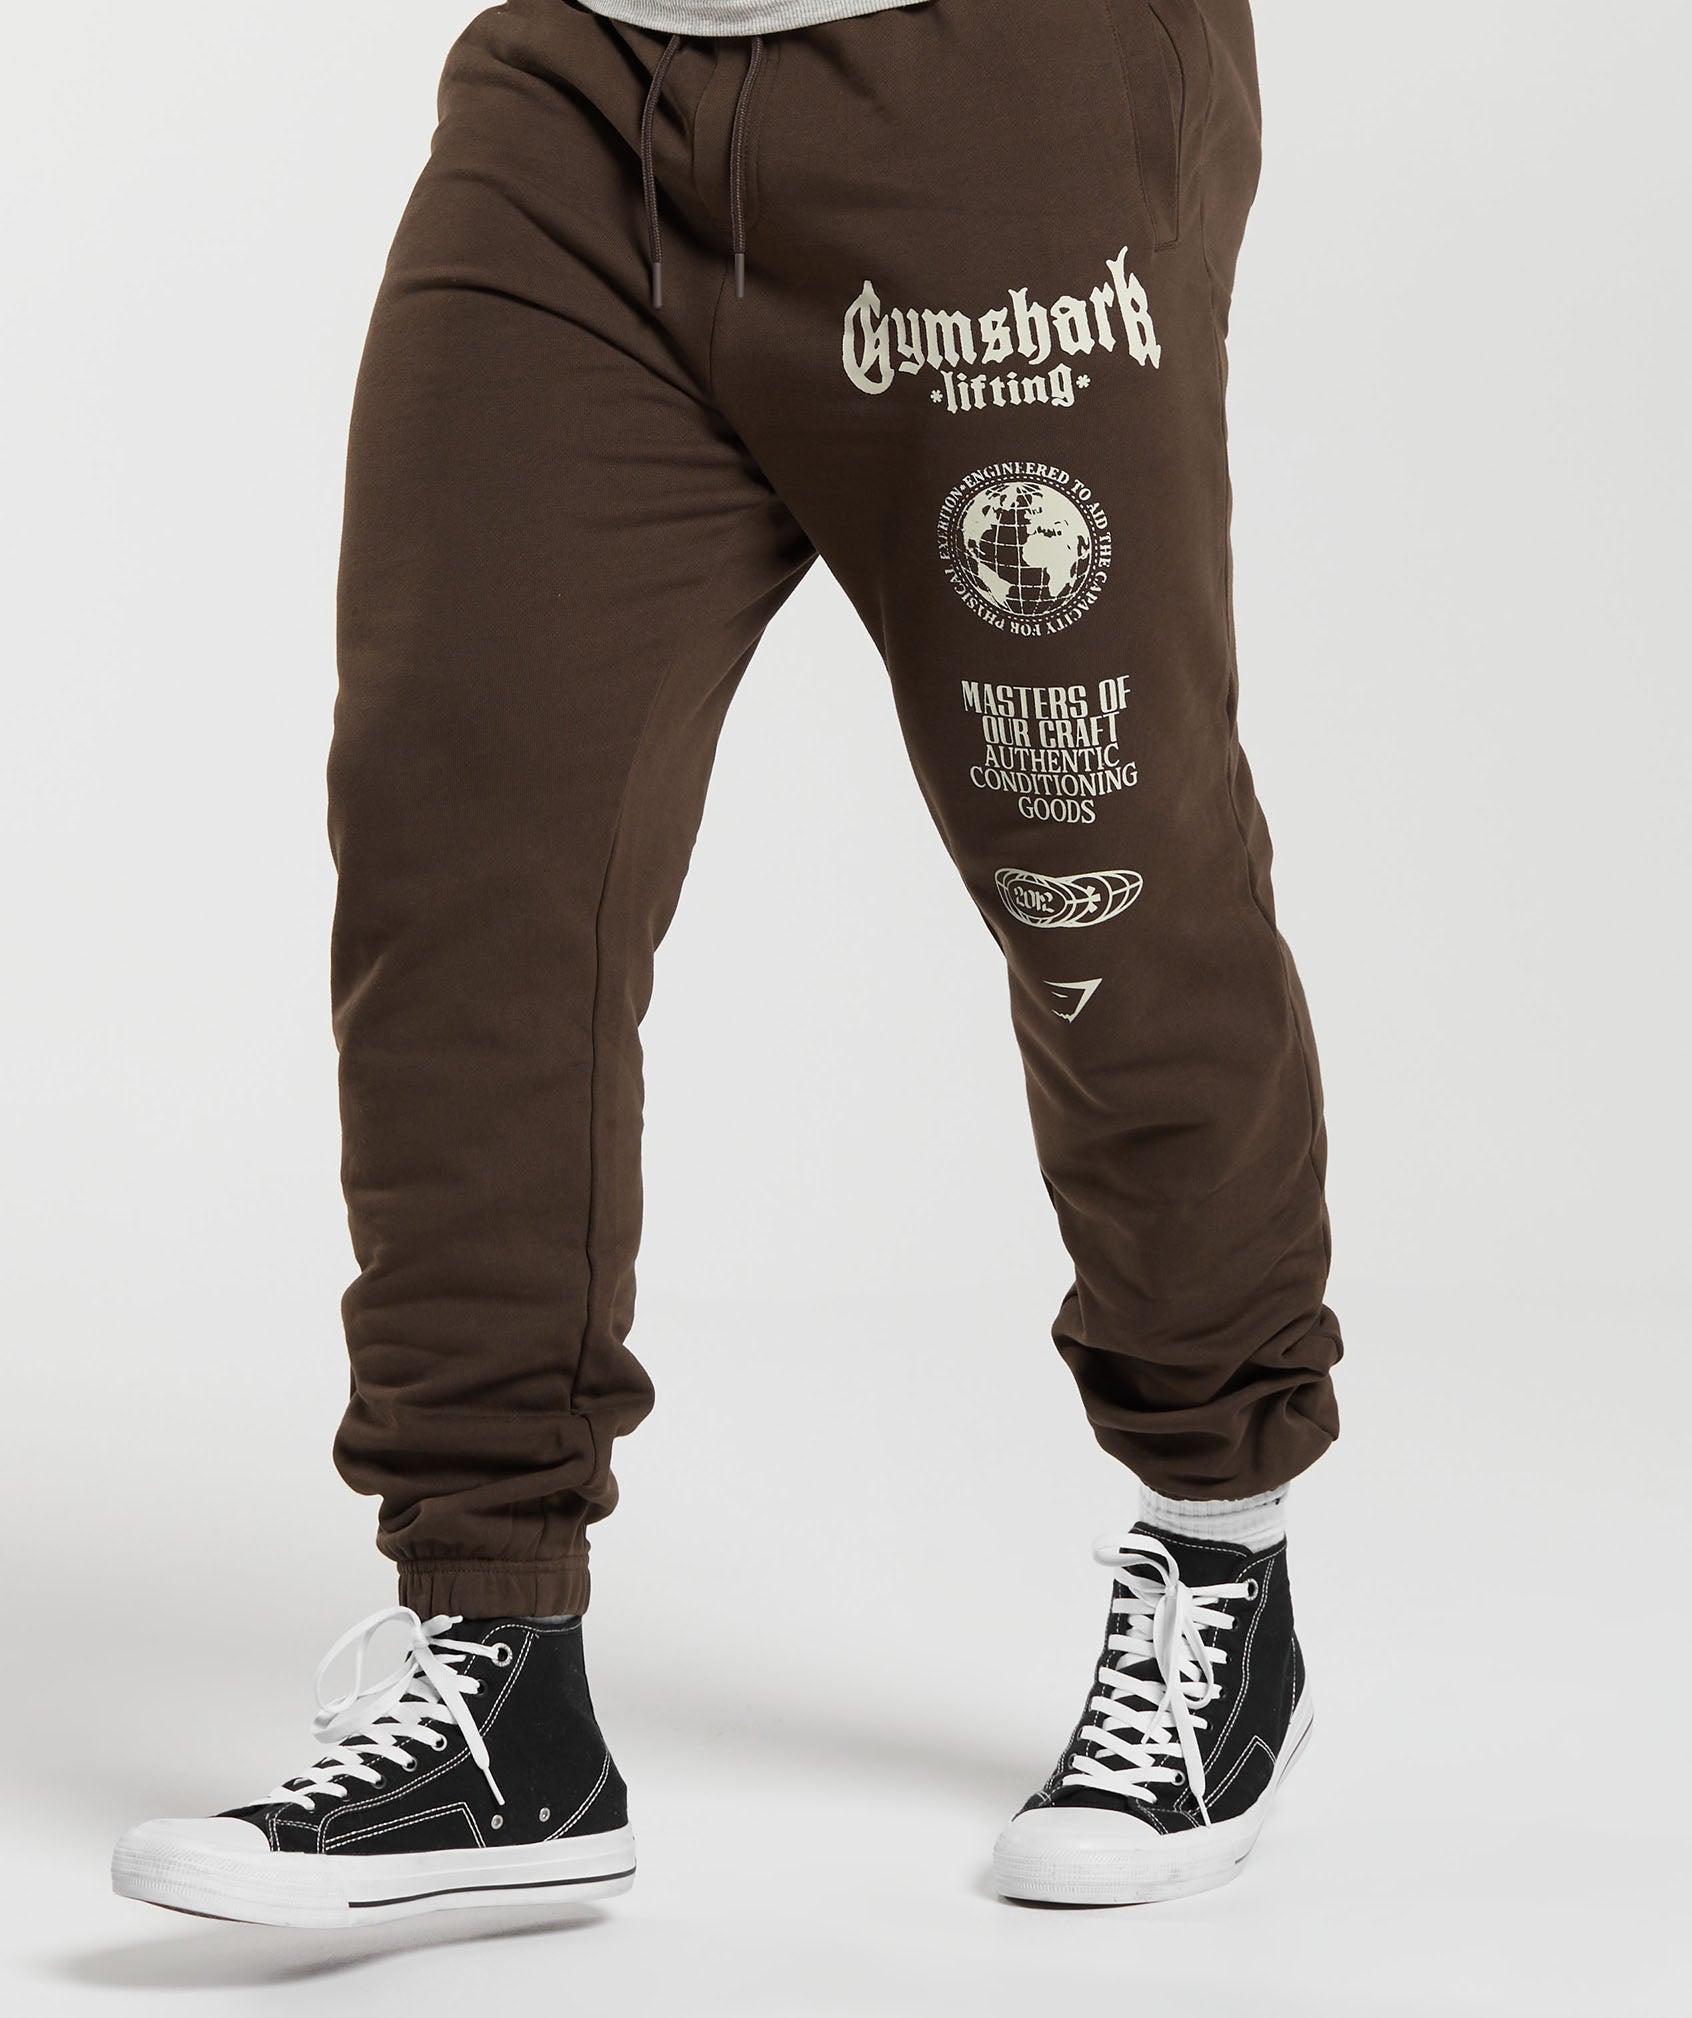 Global Lifting Oversized Joggers in Brown - view 3